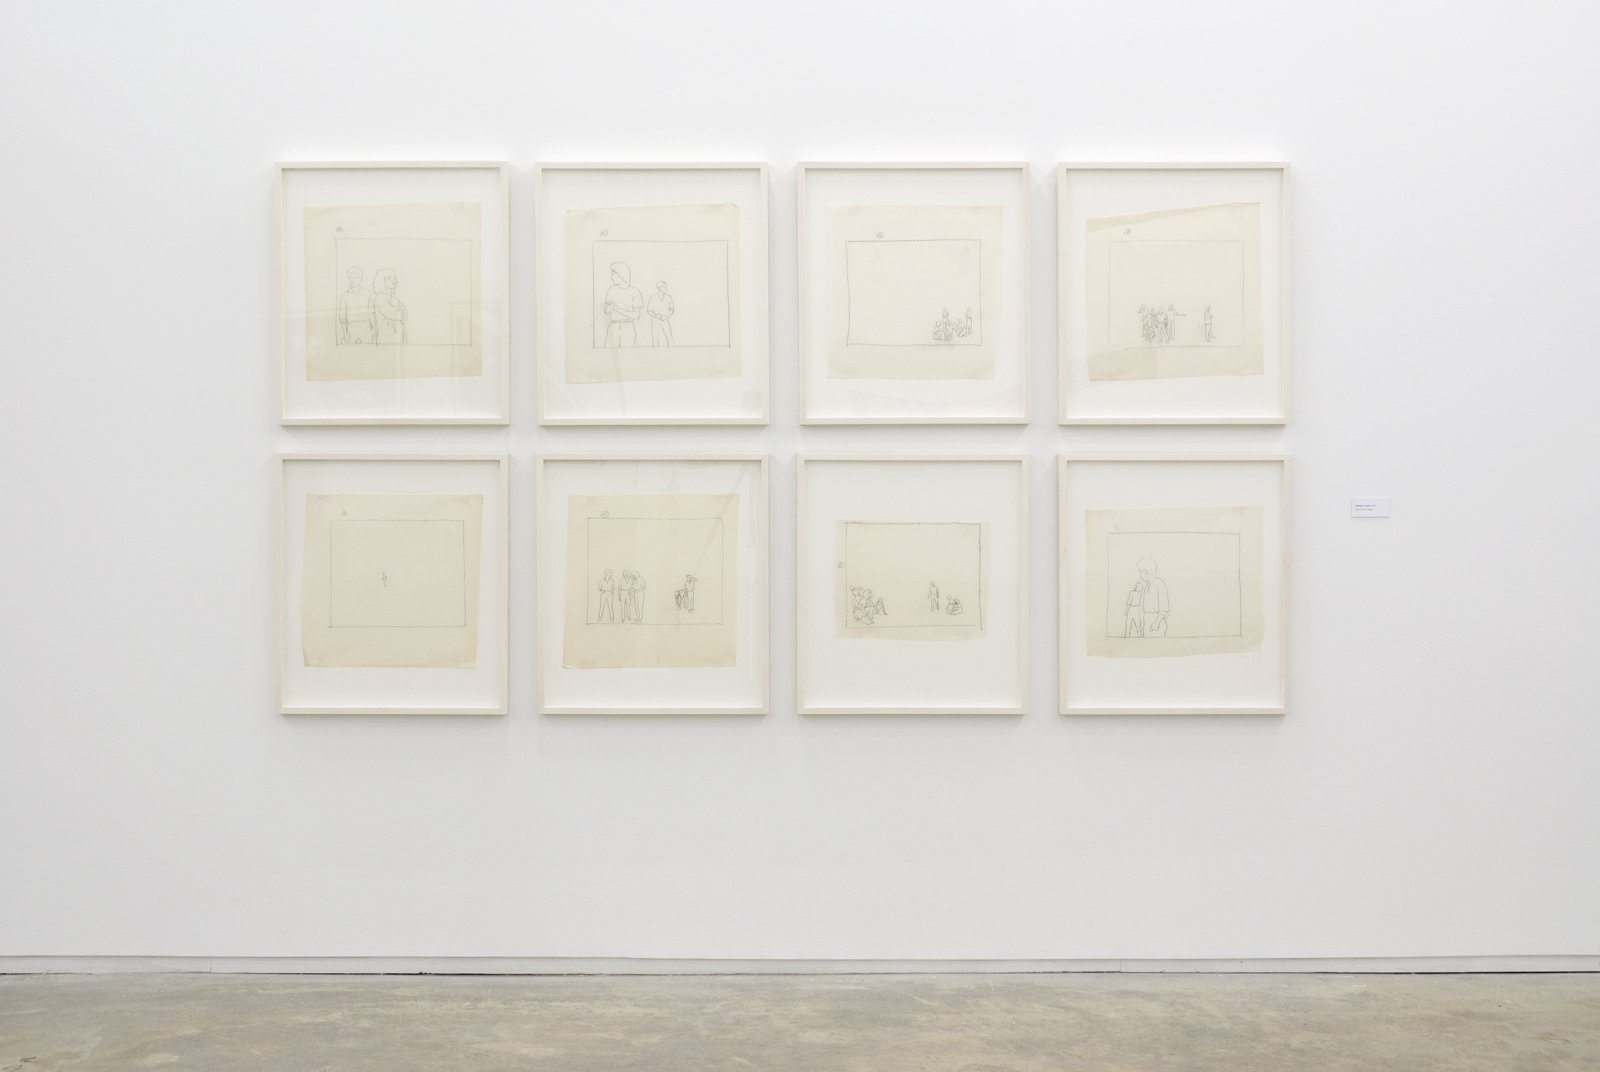 Ian Wallace, Tracings for Lookout, 1979, 8 pencil tracings on vellum, 27 x 24 in. (69 x 61 cm) by Ian Wallace